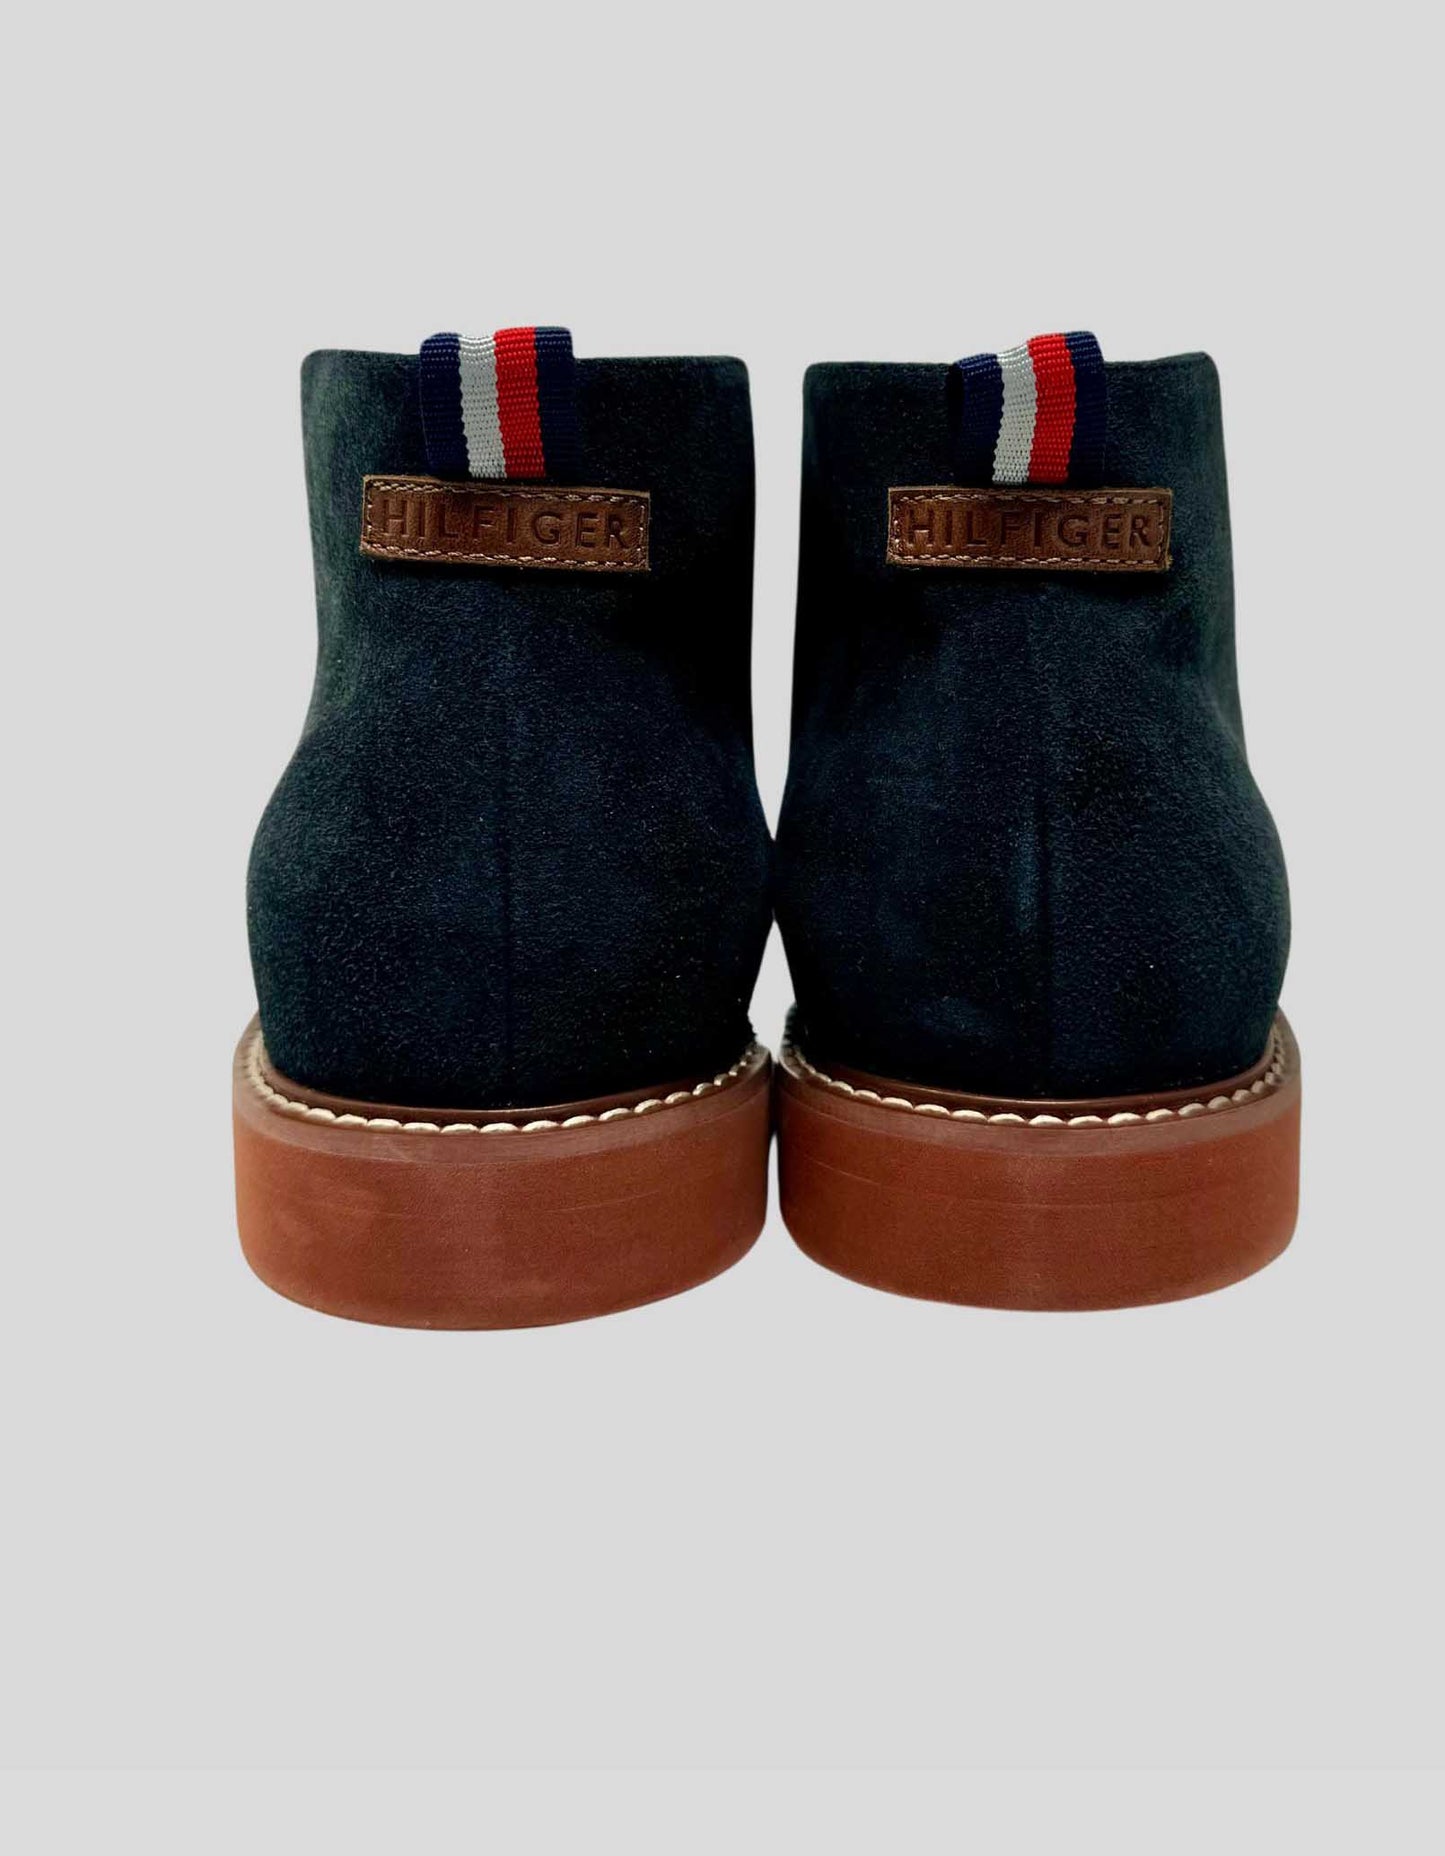 TOMMY HILFIGER Gervis Blue Suede Chukka Boots w/ Tags - 11 M US